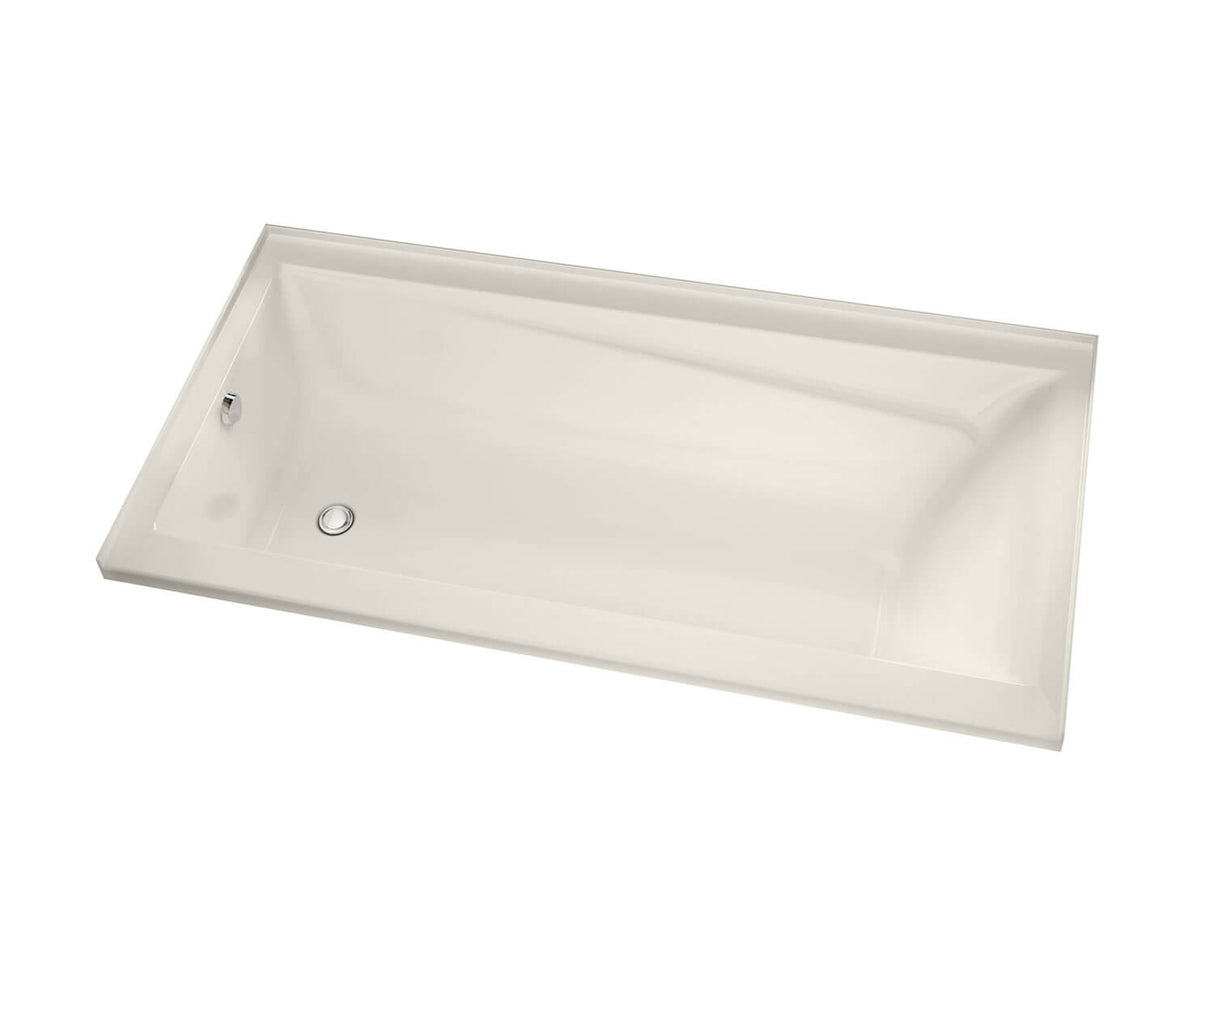 MAAX 106224-R-003-007 Exhibit 7232 IF Acrylic Alcove Right-Hand Drain Whirlpool Bathtub in Biscuit